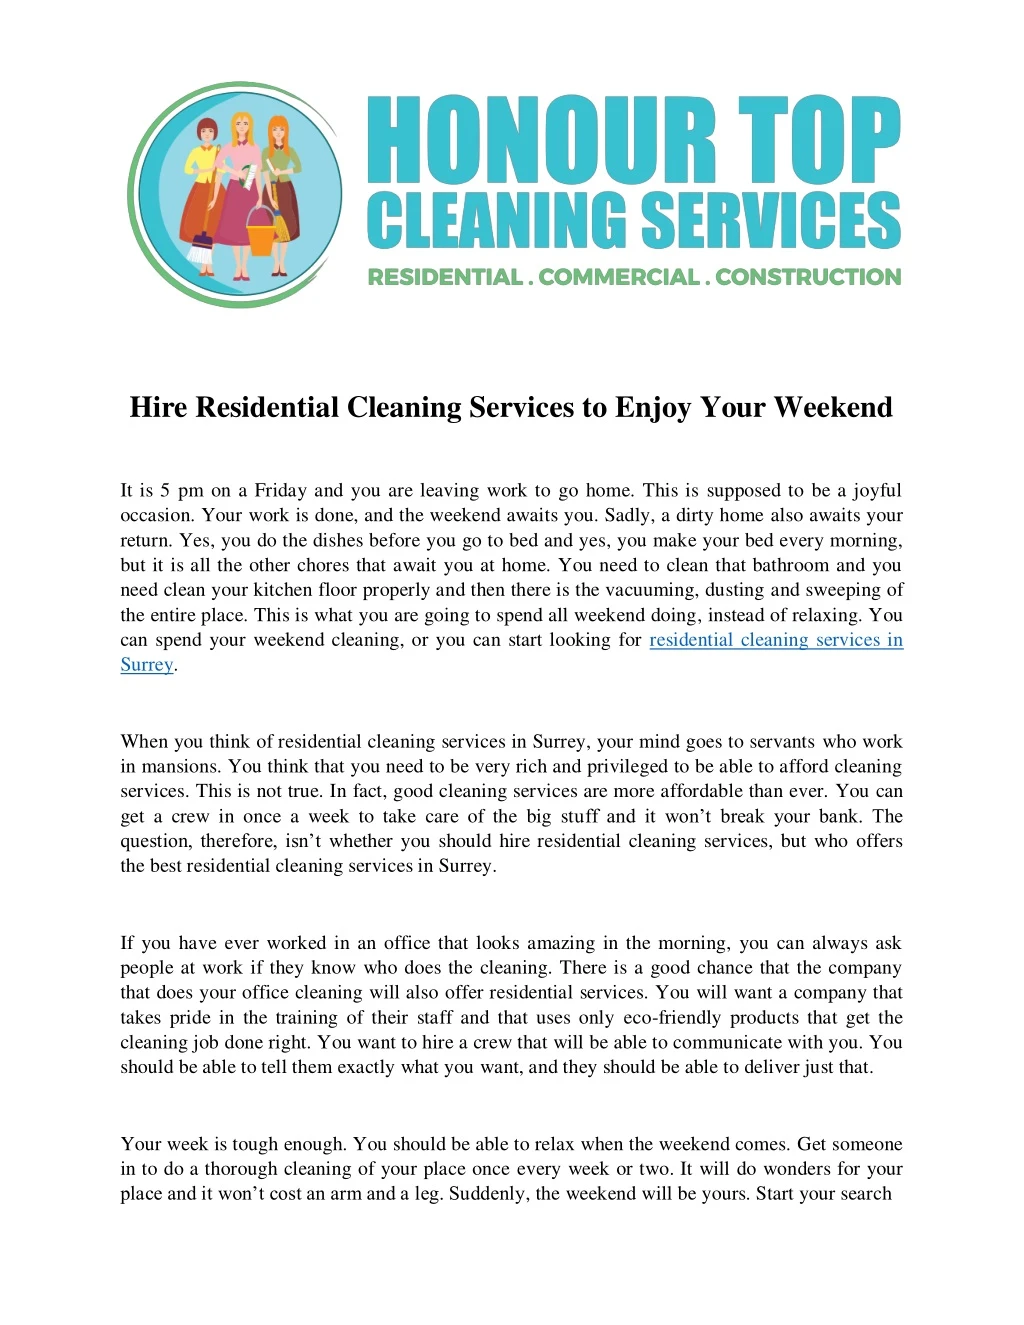 hire residential cleaning services to enjoy your